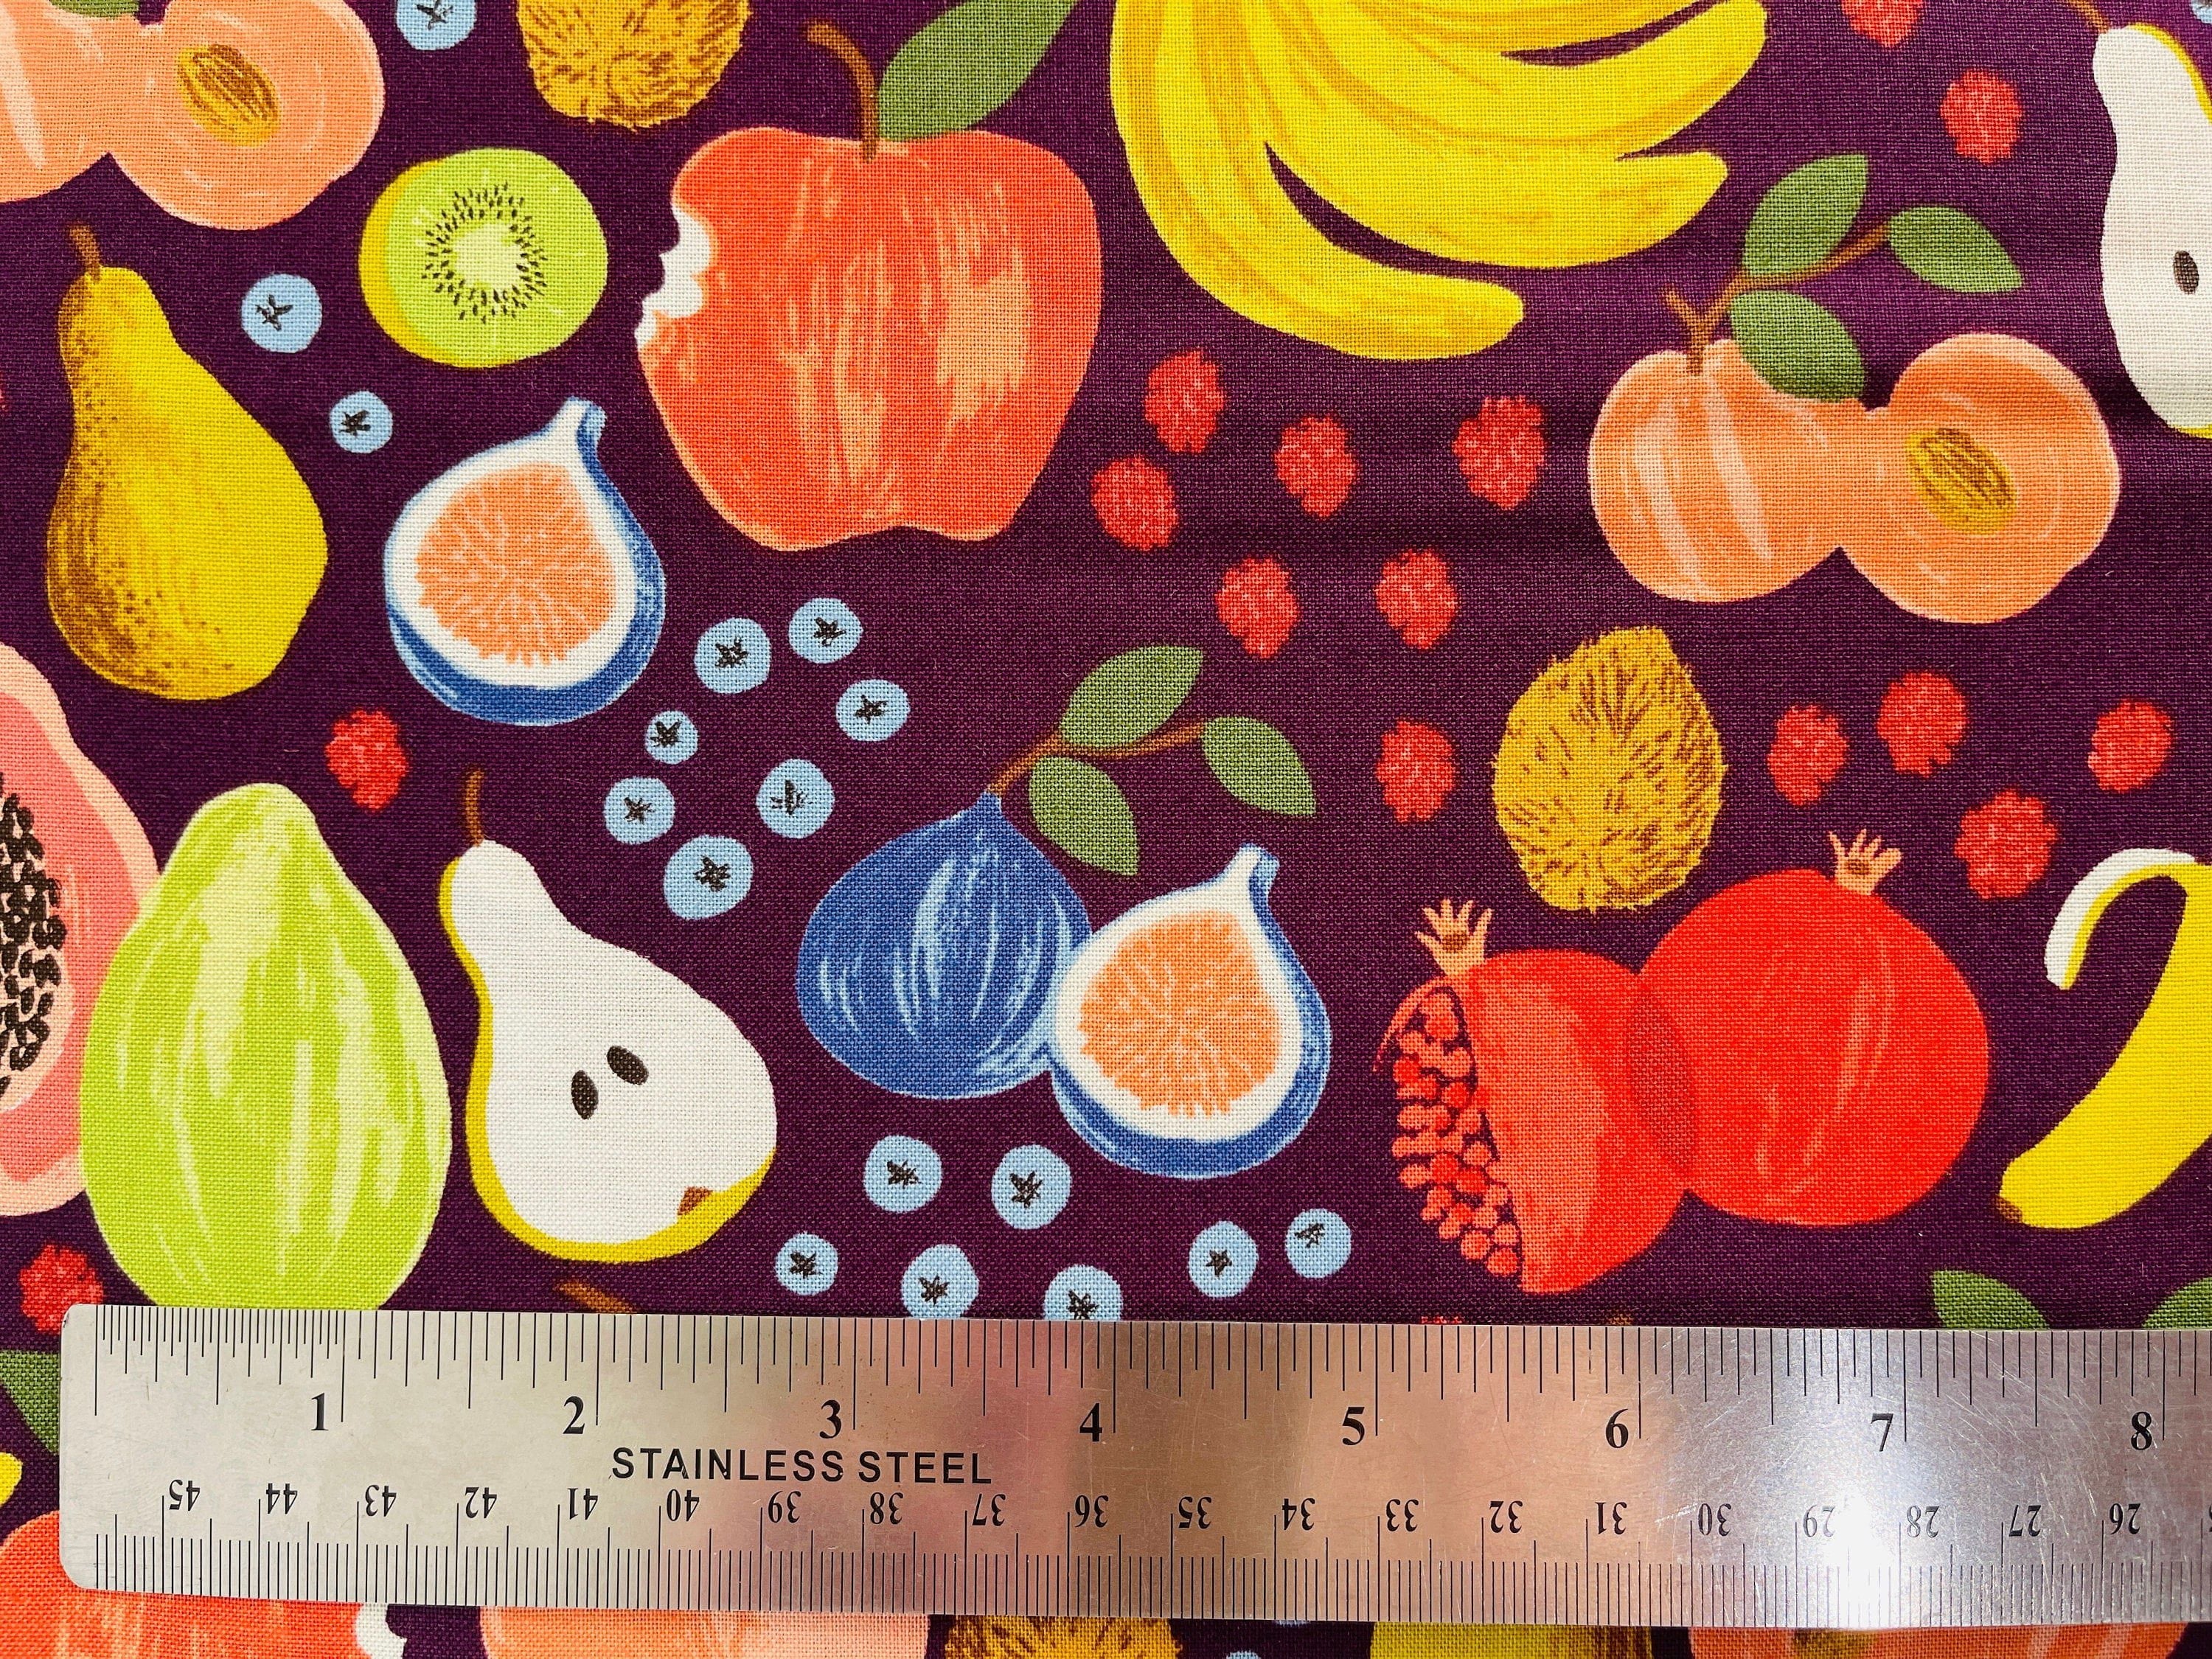 Orchard-Fruit Stand-Burgundy Fabric-Rifle Paper Co-Cotton + Steel-RP1200-BU1